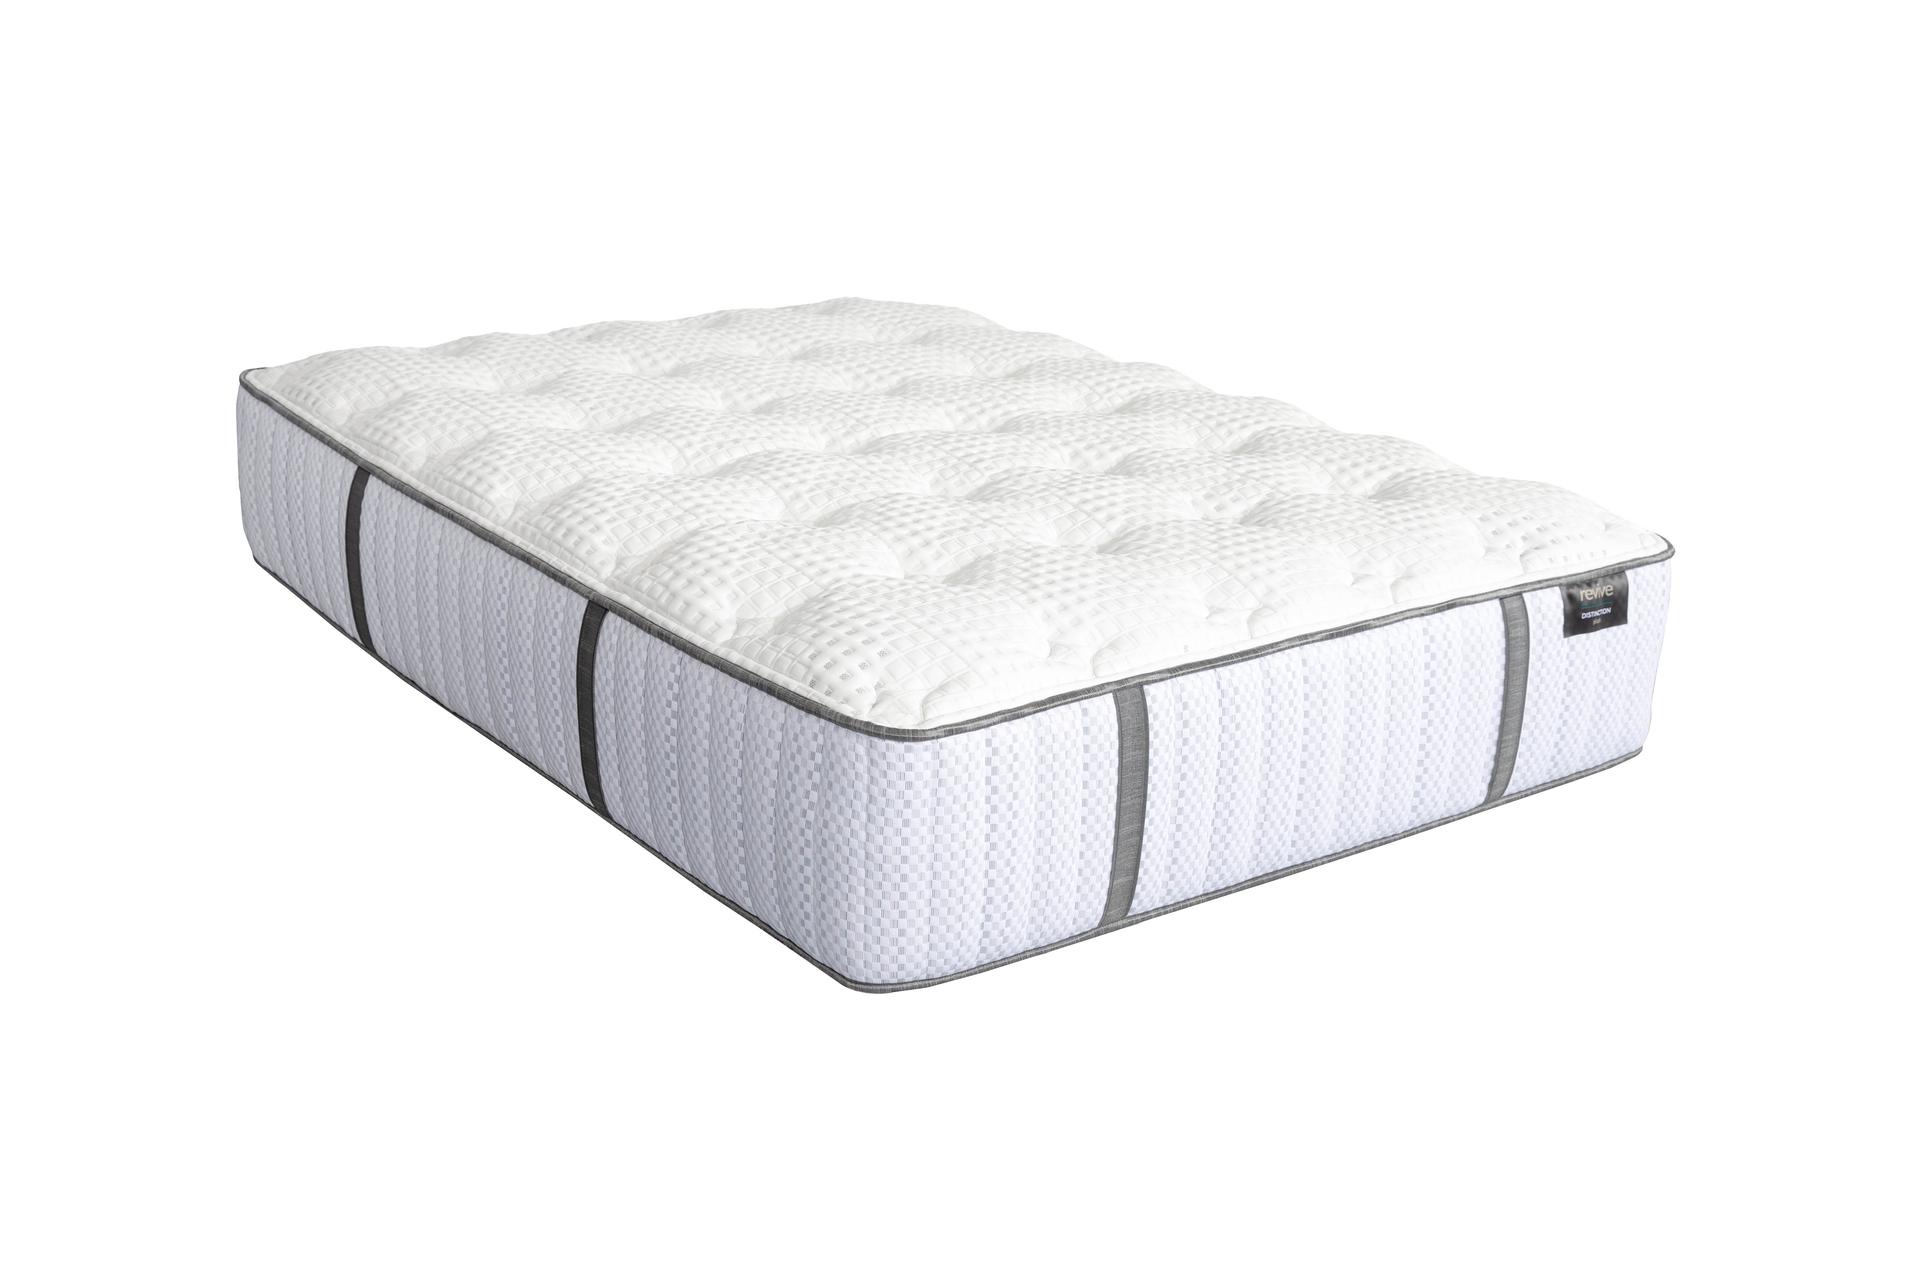 Day Rise 8" Plush Mattress Cal King All Sales Final As Is Clearance Item 